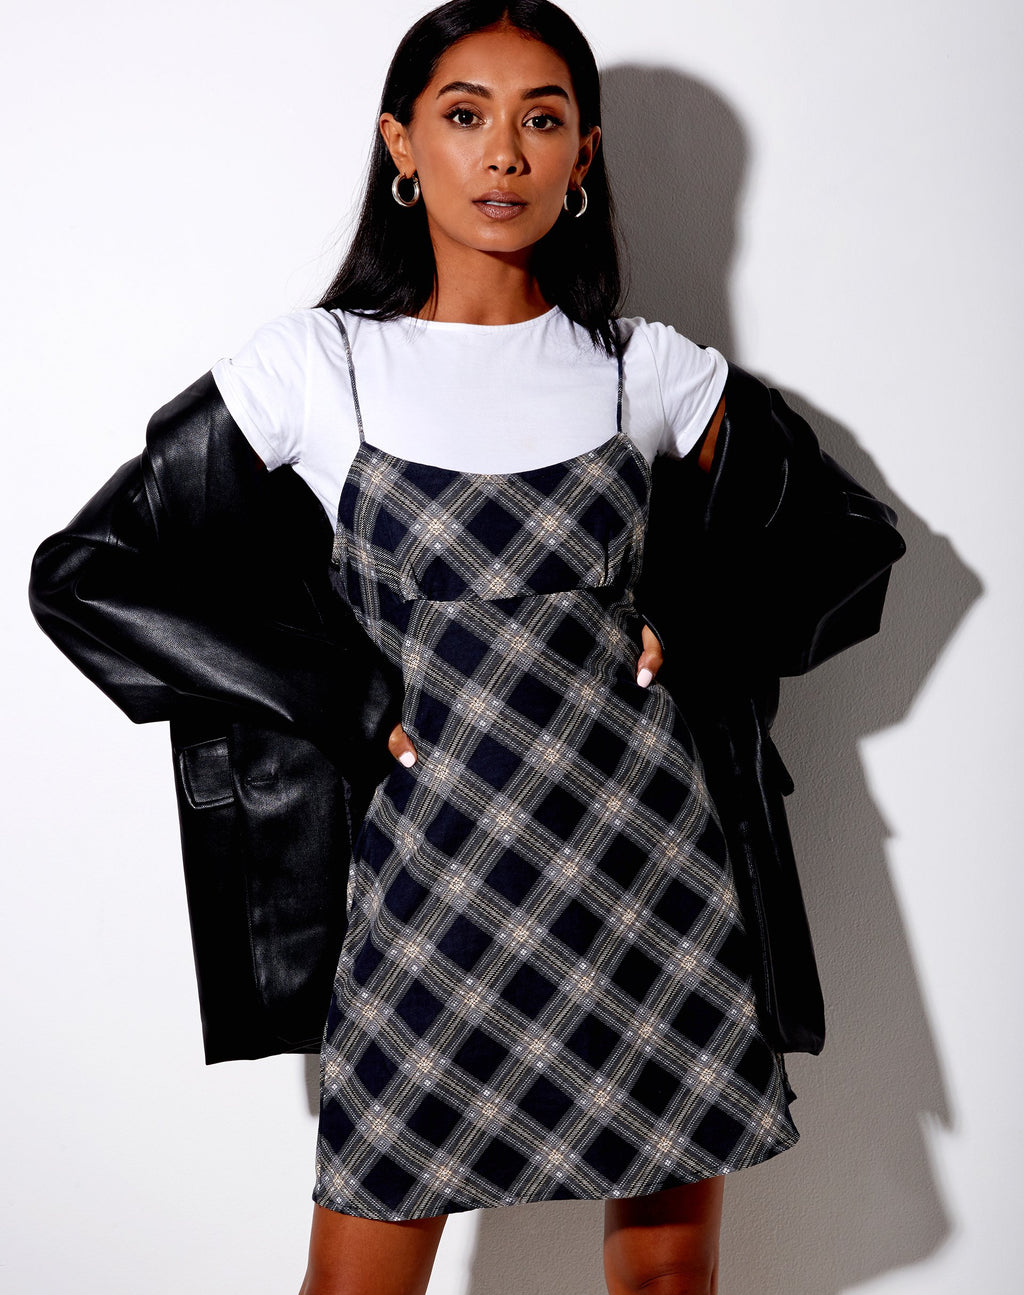 Valy Slip Dress in 20's Check Black and Grey